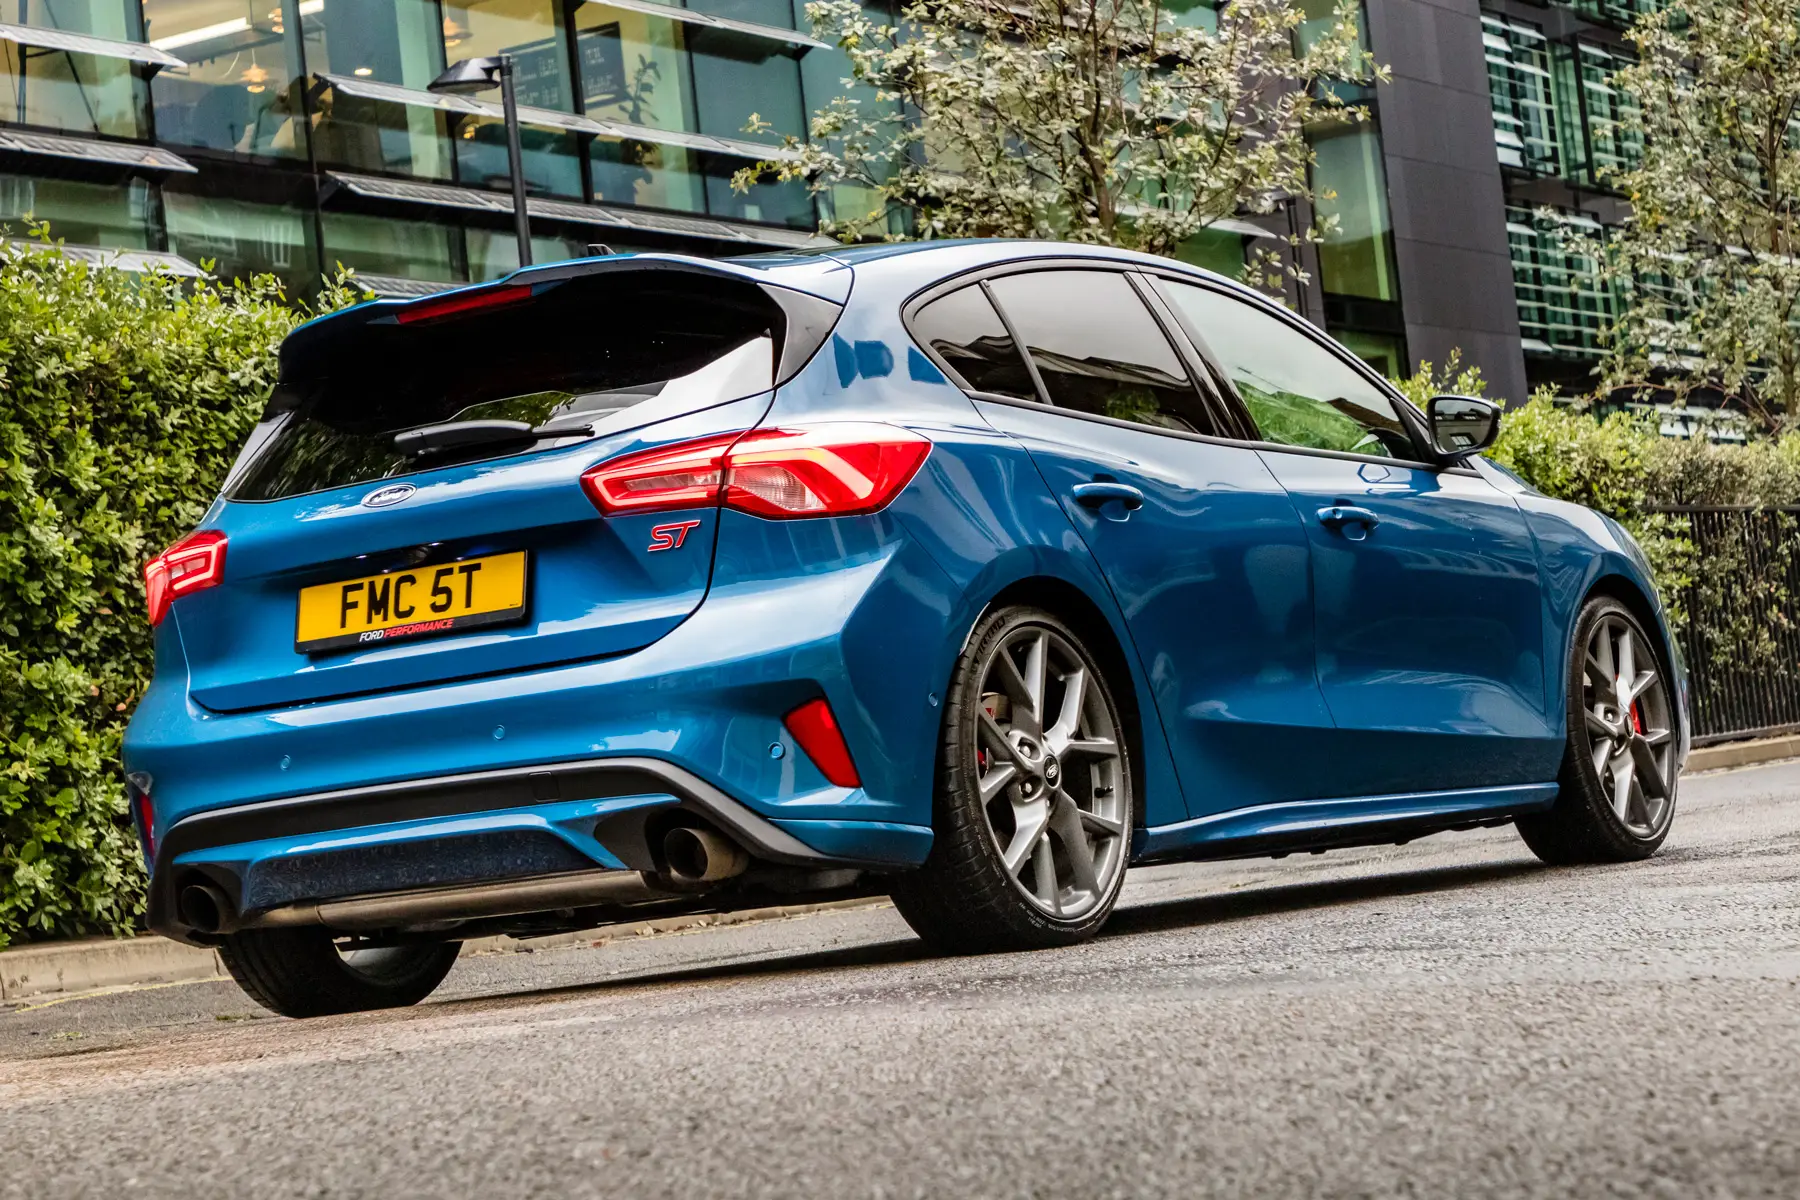 Ford Focus ST Review: Driving dynamic